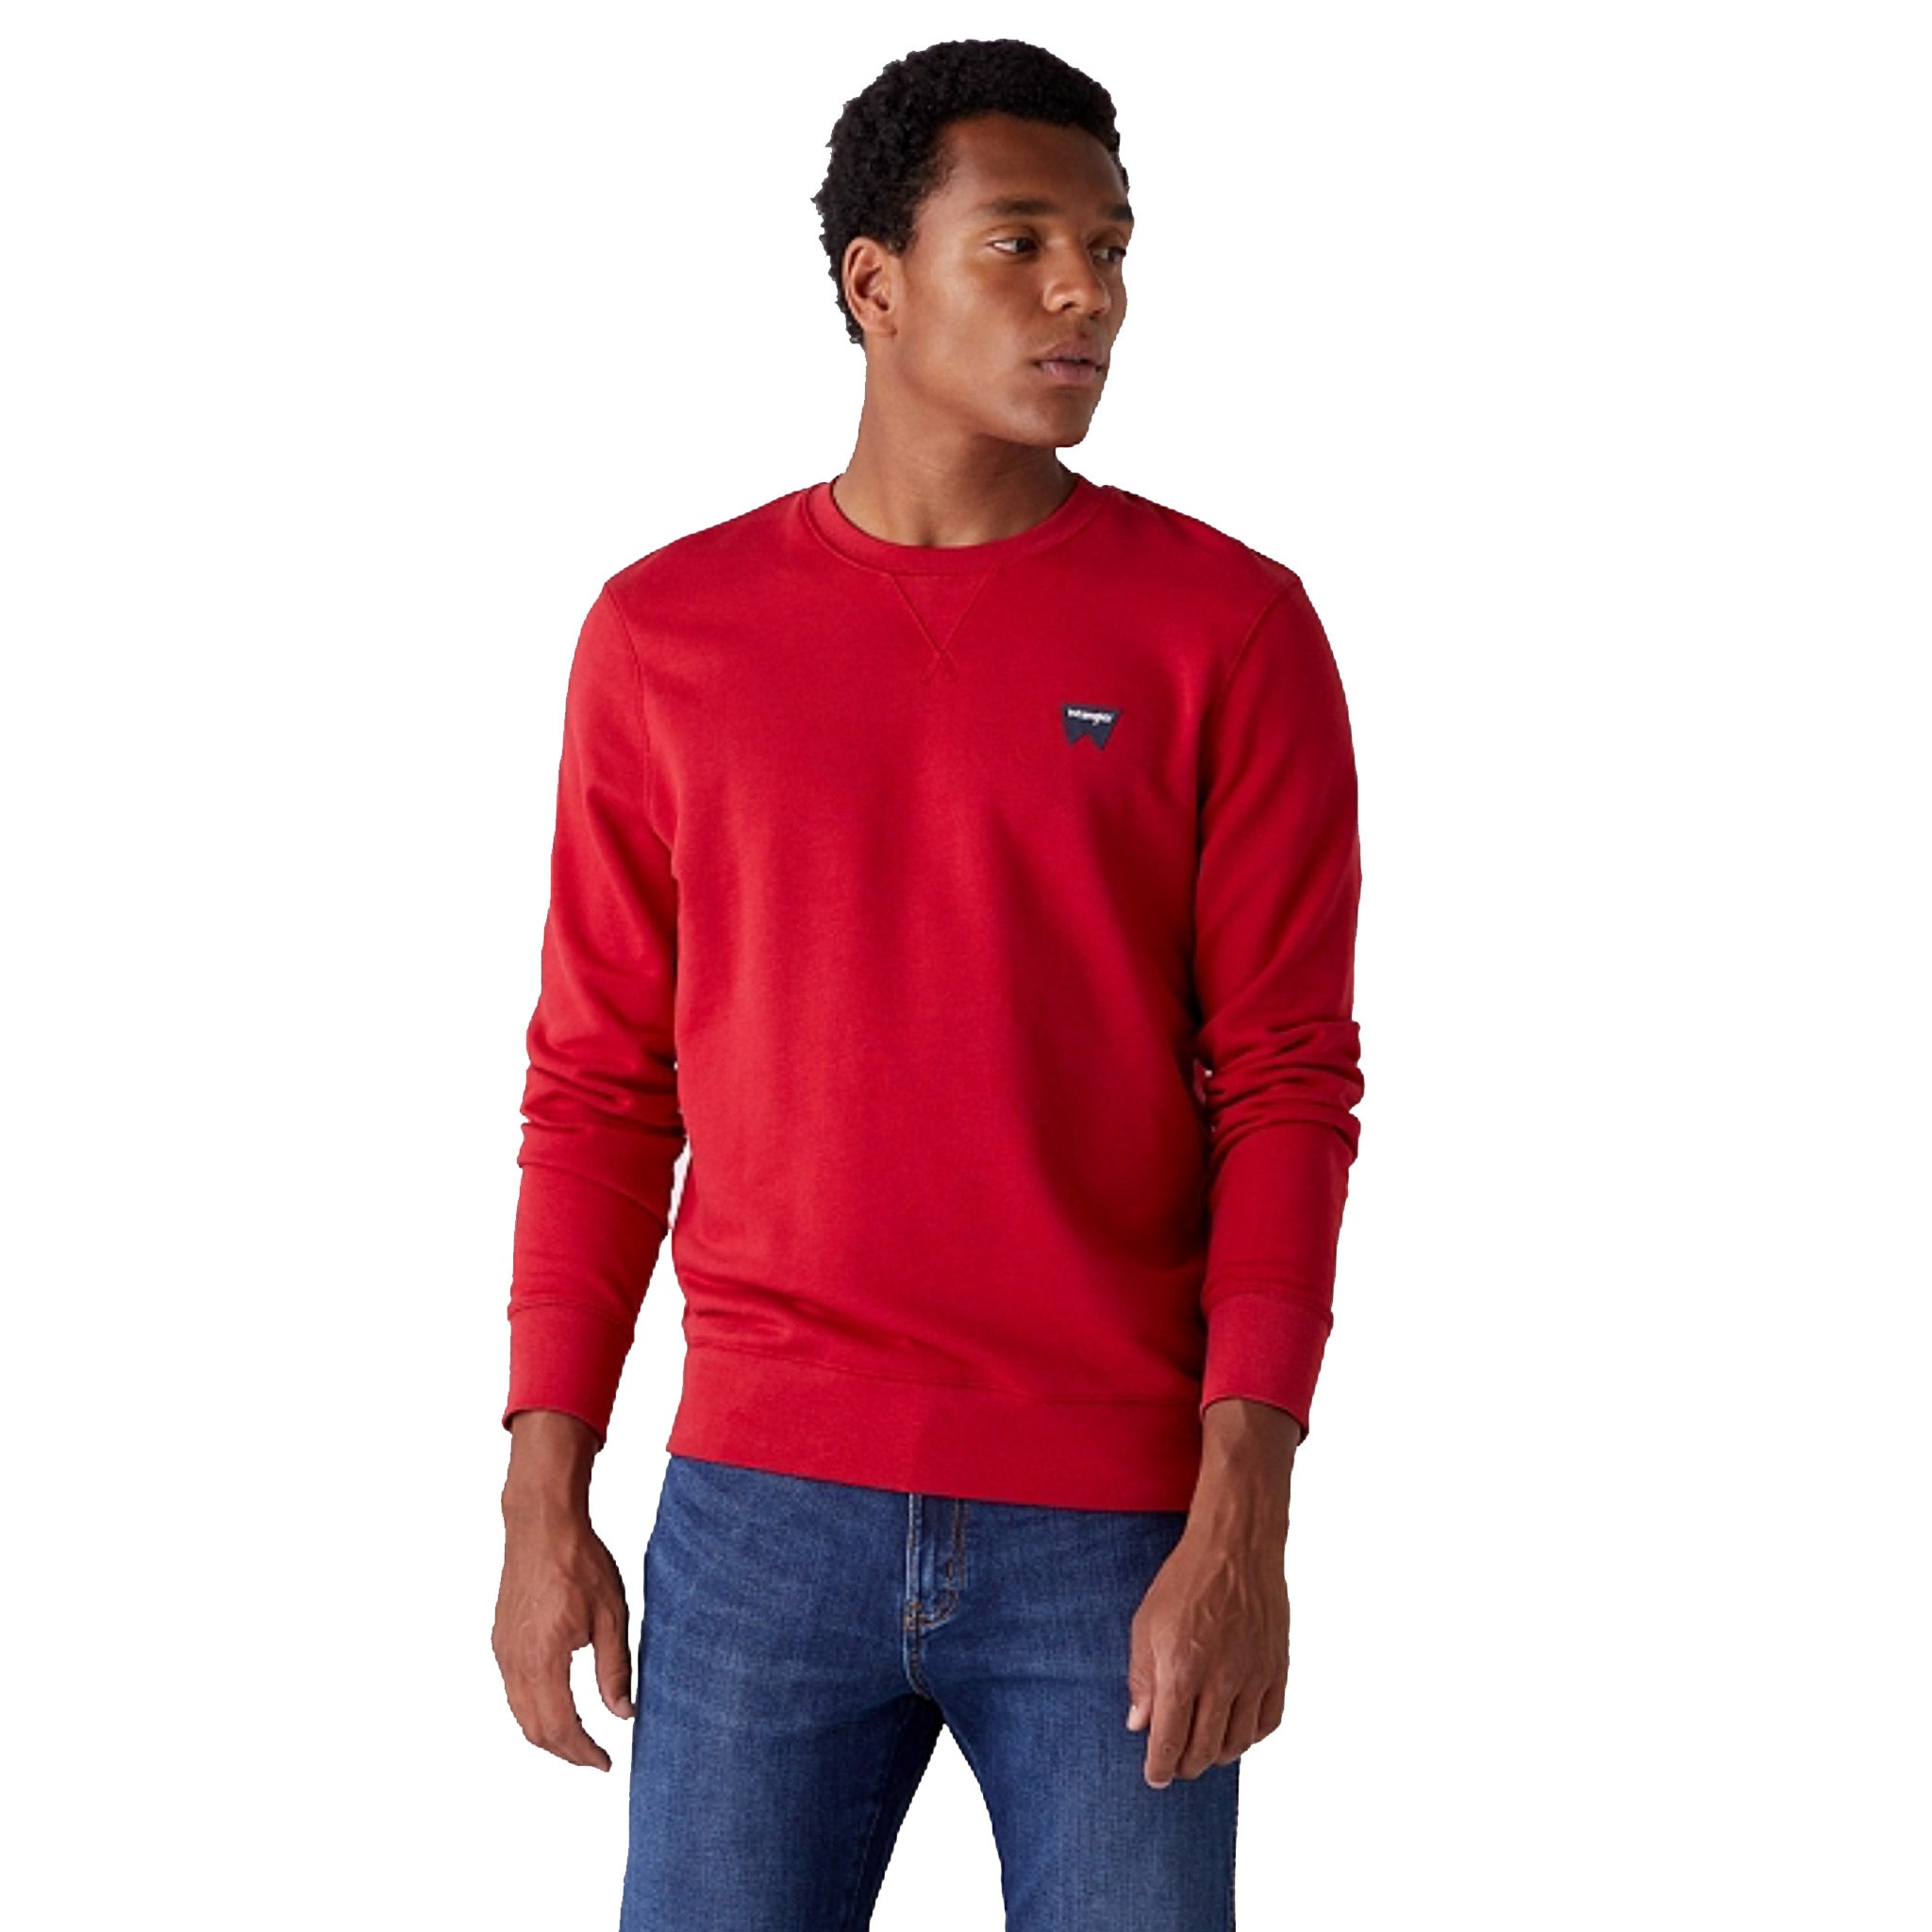 Wrangler Sign Off Sweatshirt in Red Worn By Model Looking to The Right